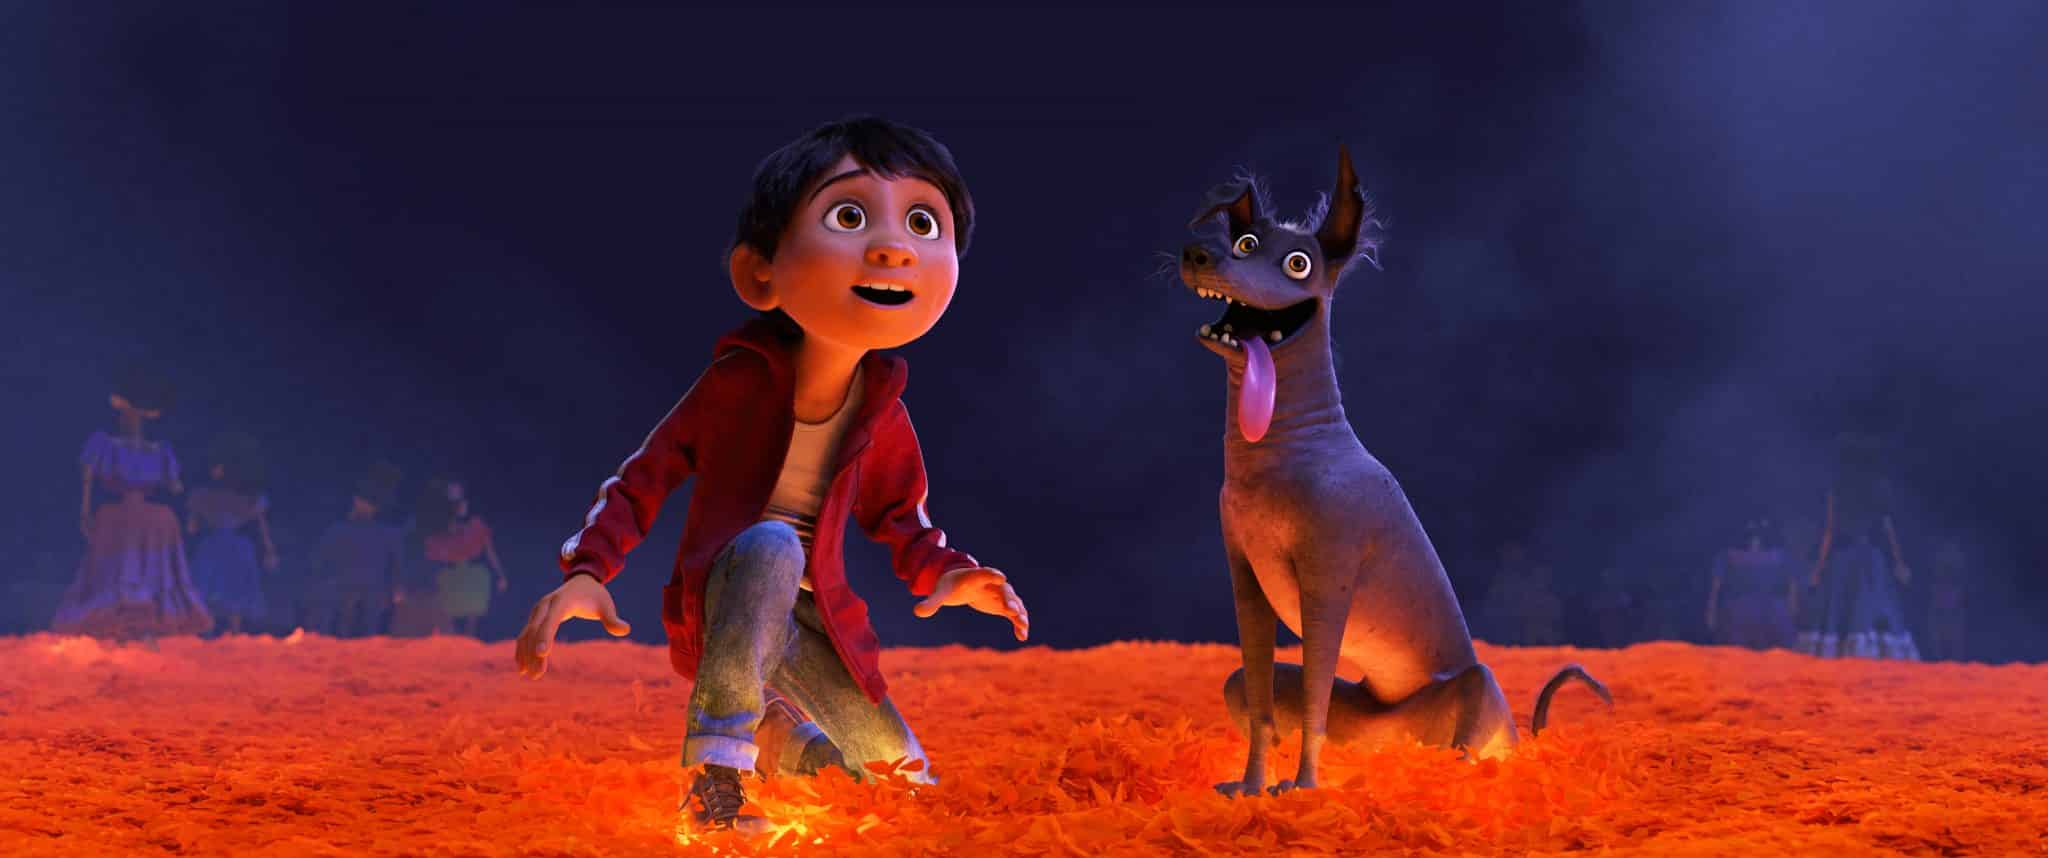 11 Things to Watch for in Pixar's Coco! #PixarCocoEvent